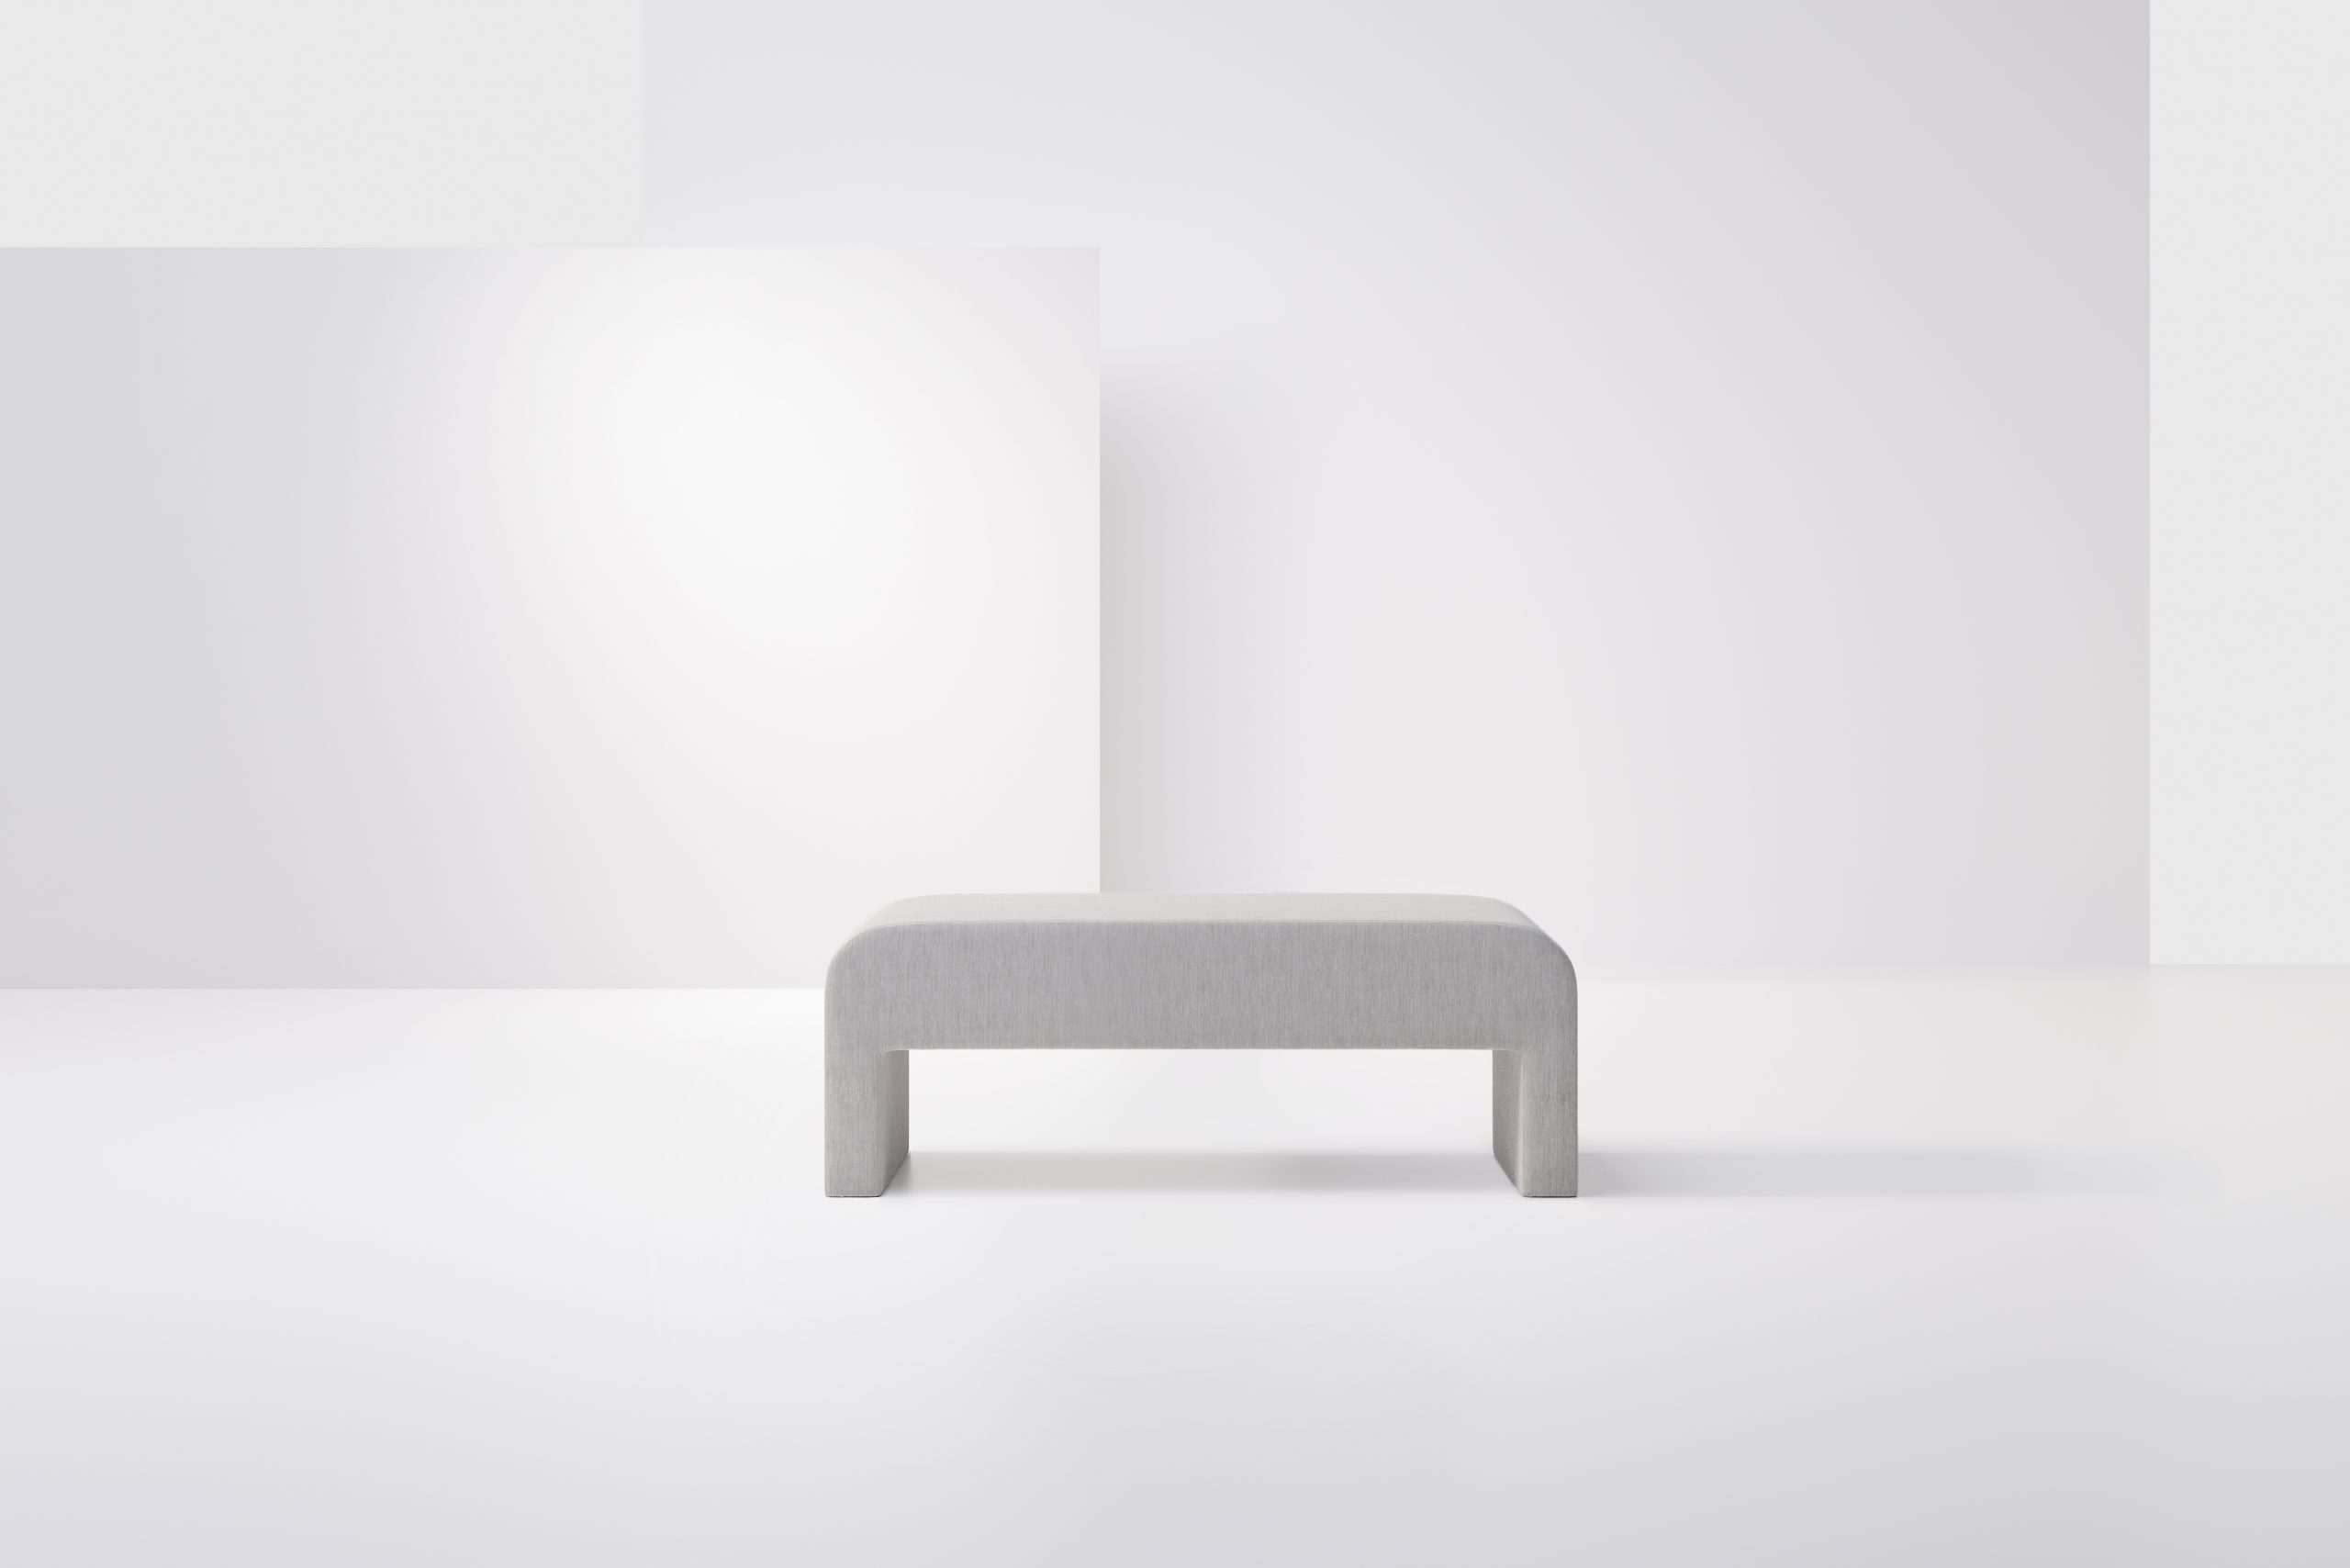 Bryce 54 Bench Product Image 2